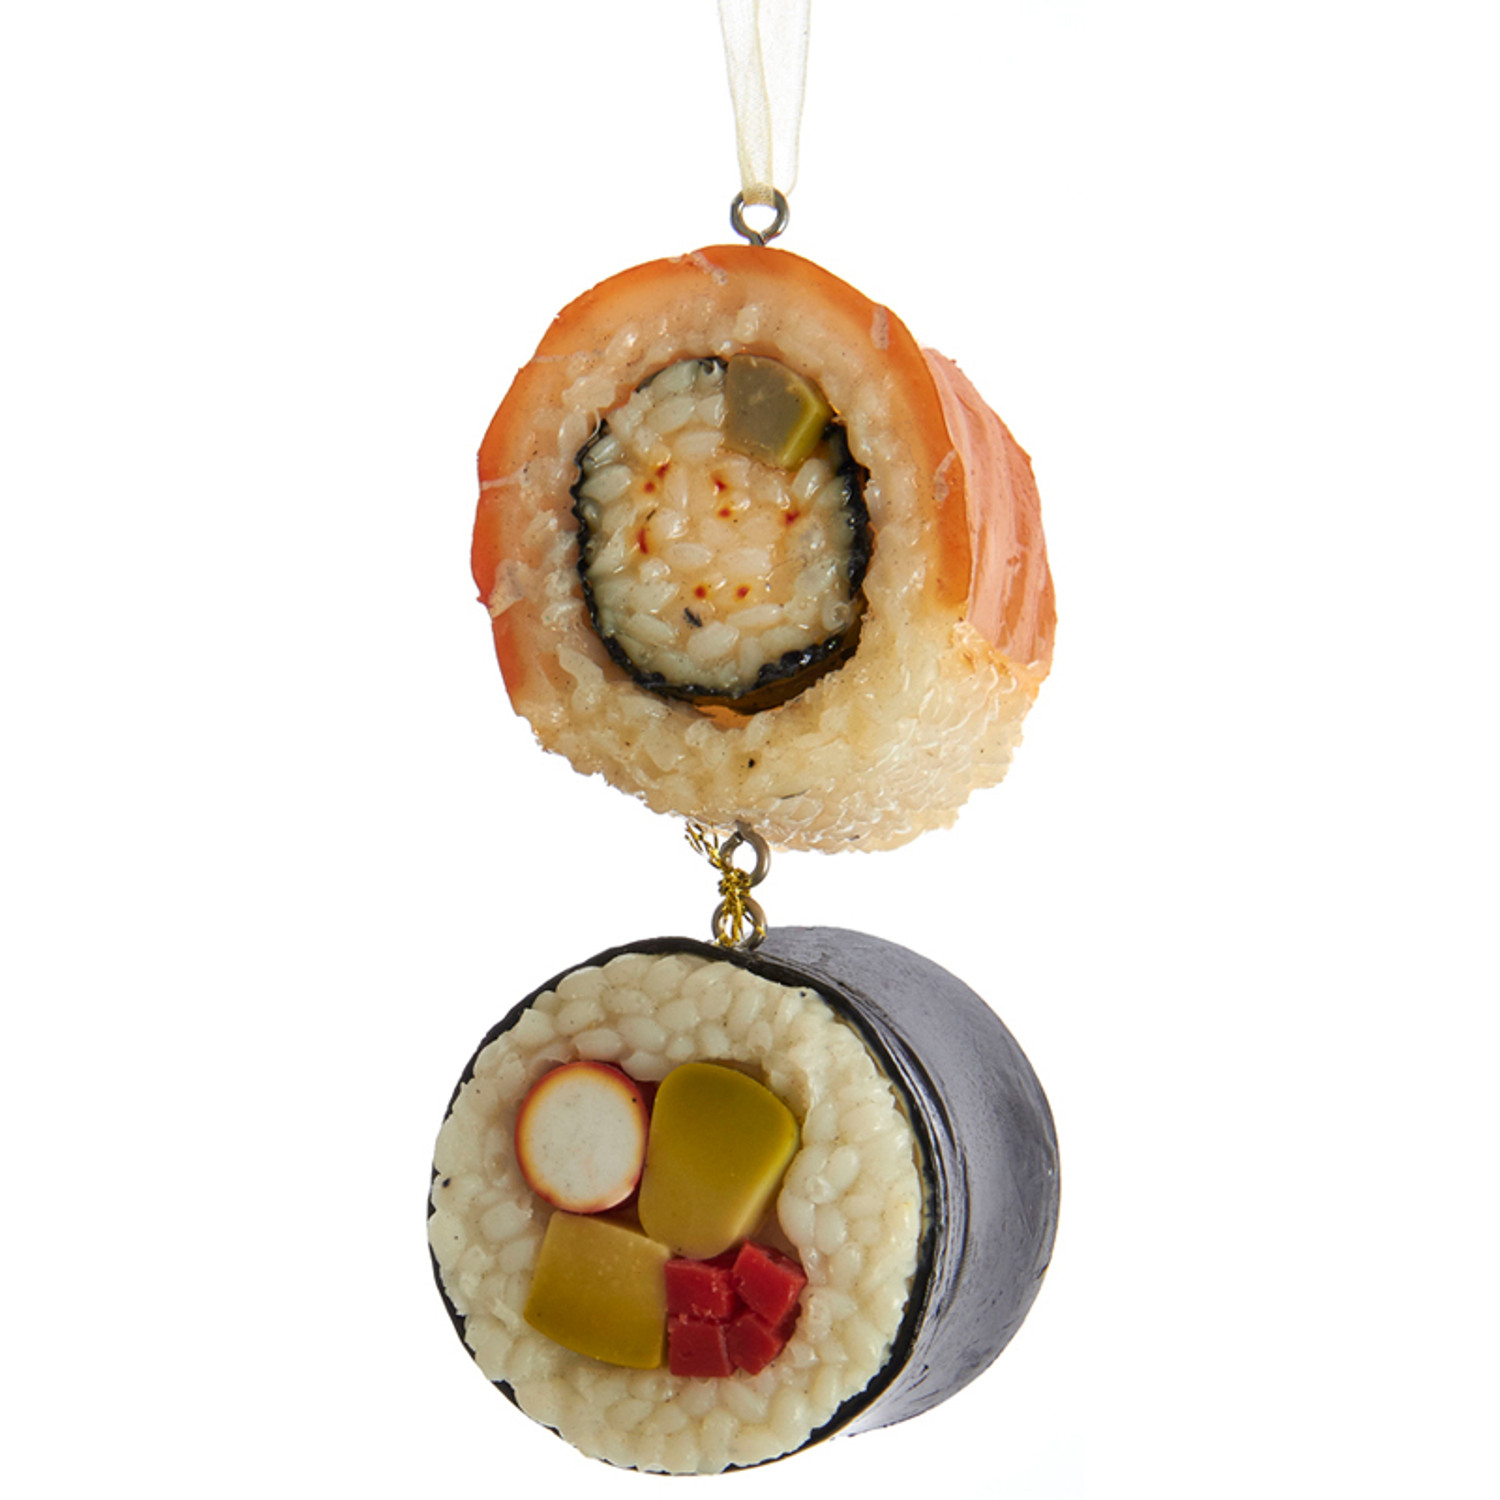 Sushi Roll Glass Ornament Xmas Funny Japanese Food Holiday Gift